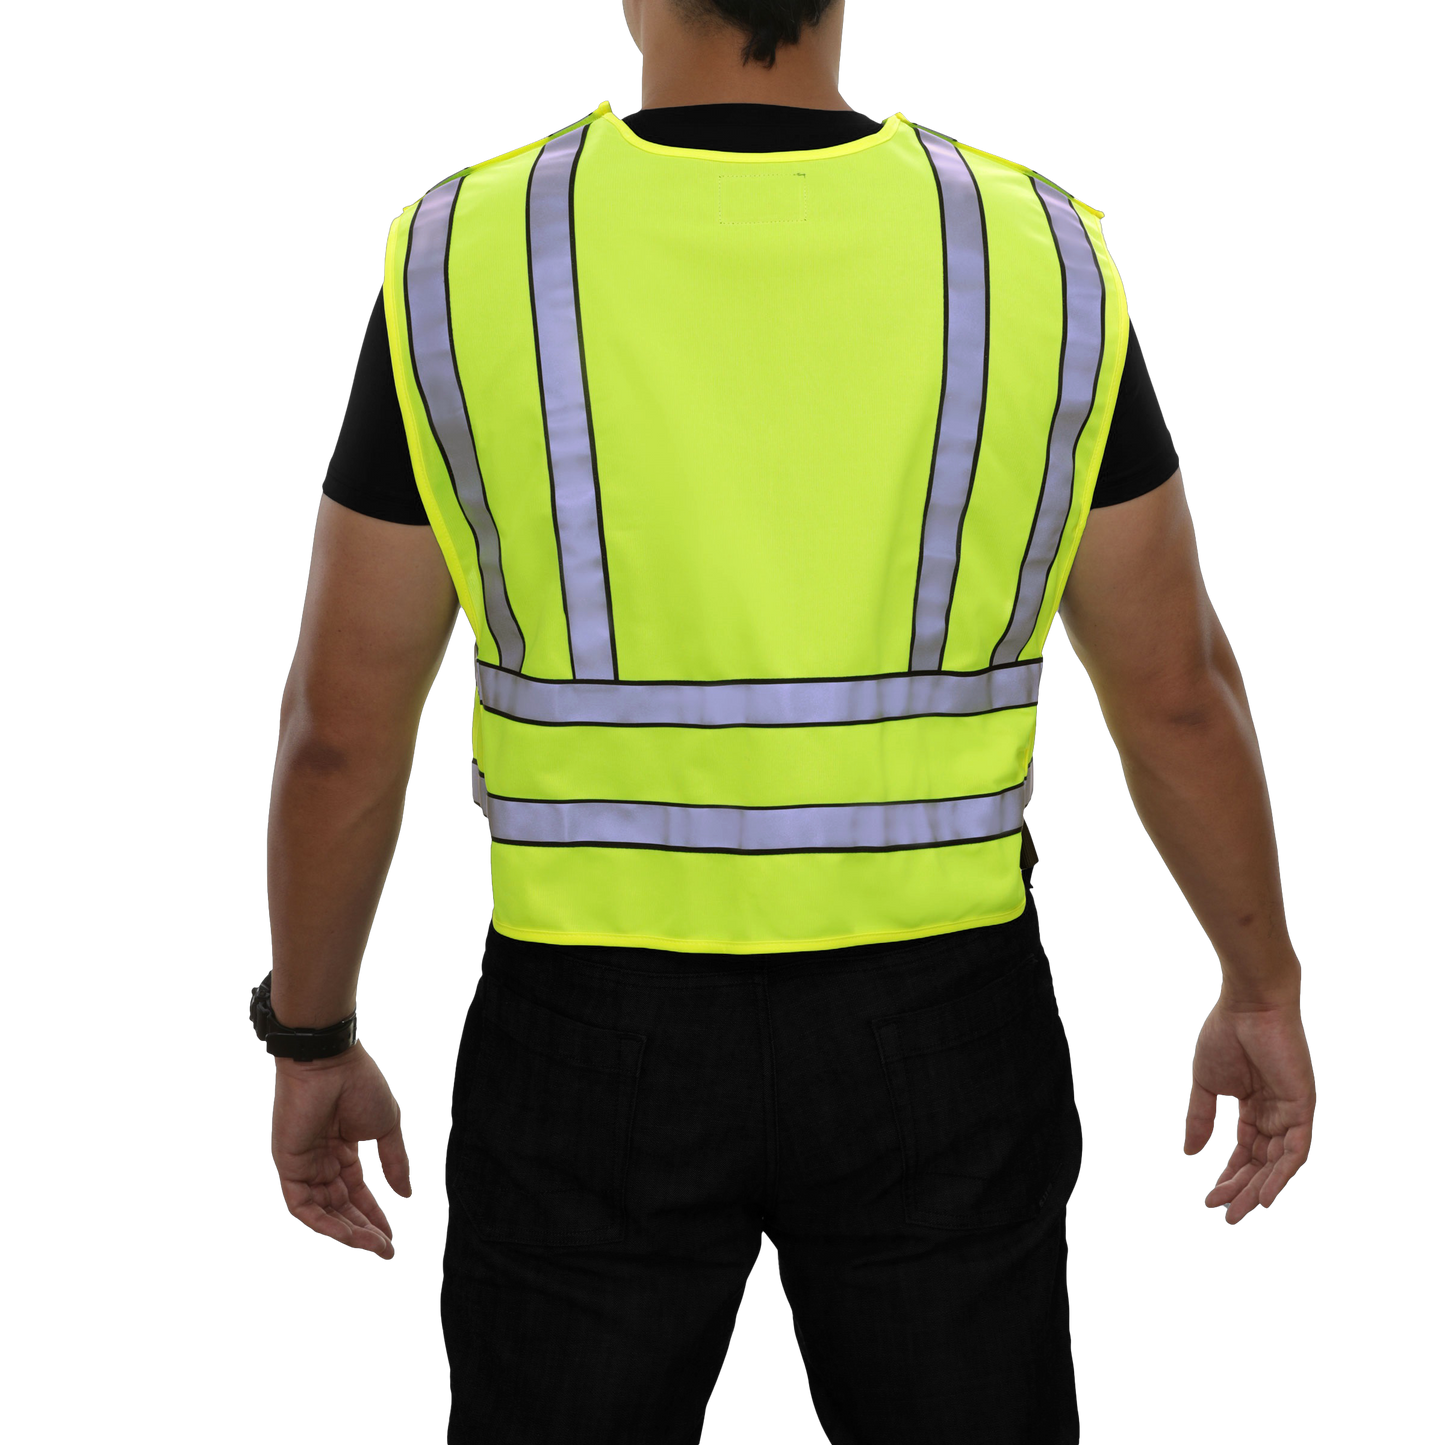 551STLM 4PT Breakaway Woven Poly Public Safety Tactical Vest